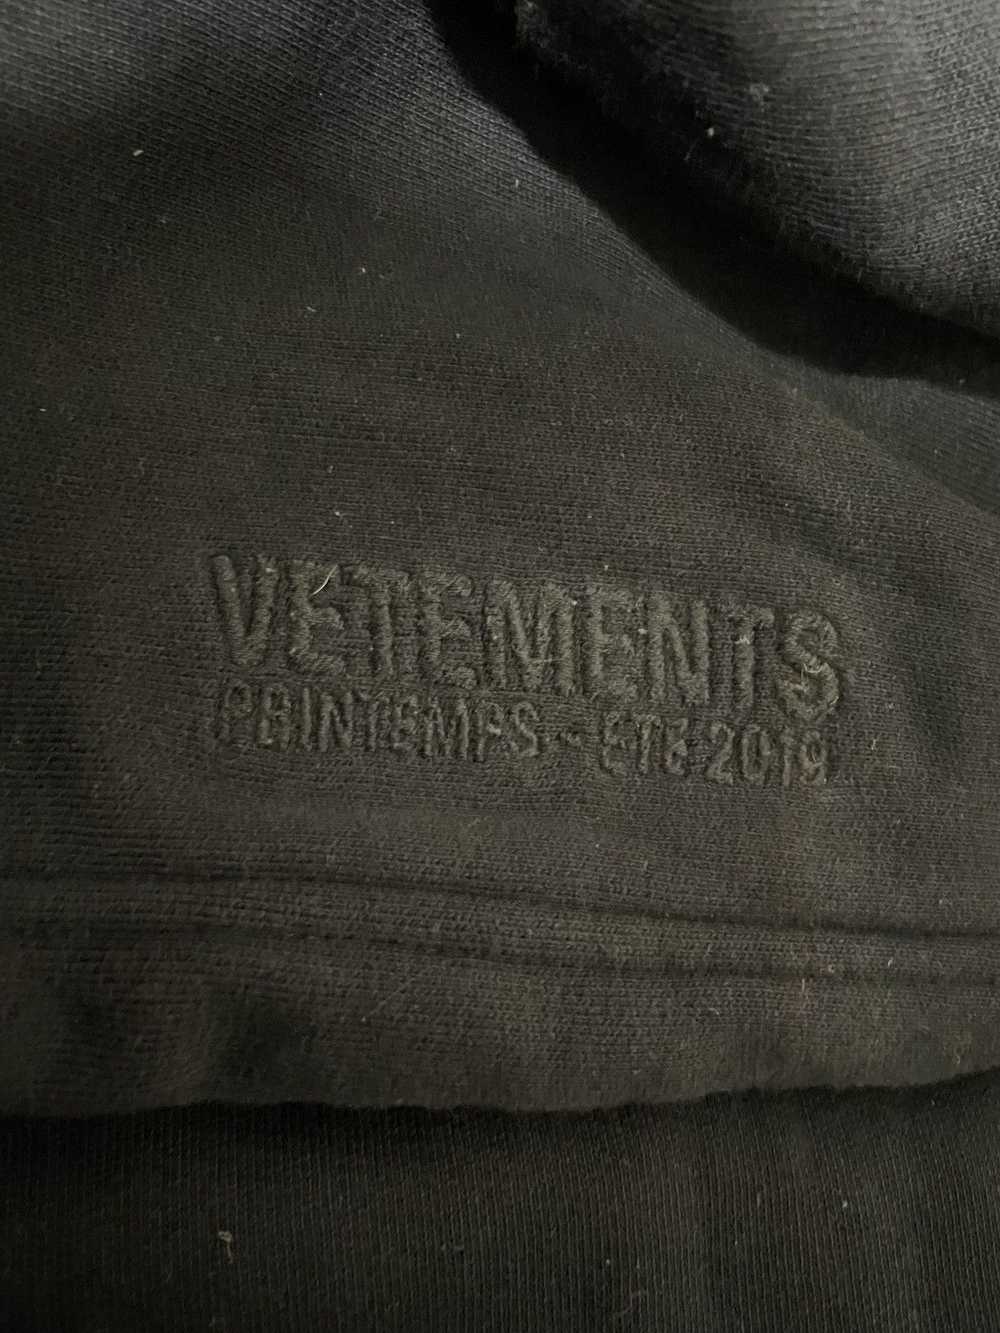 Vetements Vetements SS19 Augmented Reality Hoodie - image 6